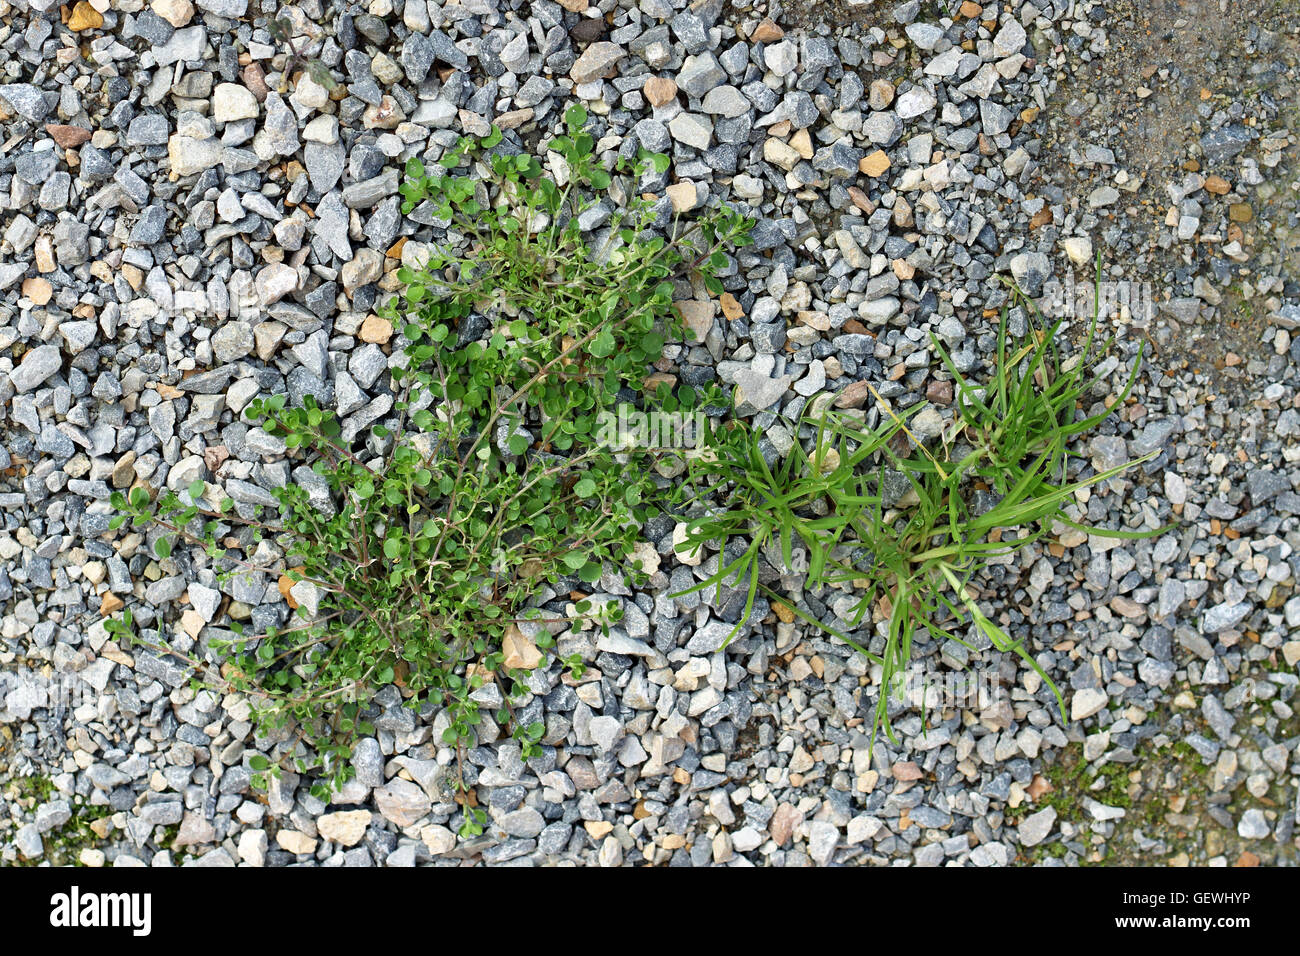 Weeds/ grass growing on crushed rocks on garden pathway Stock Photo